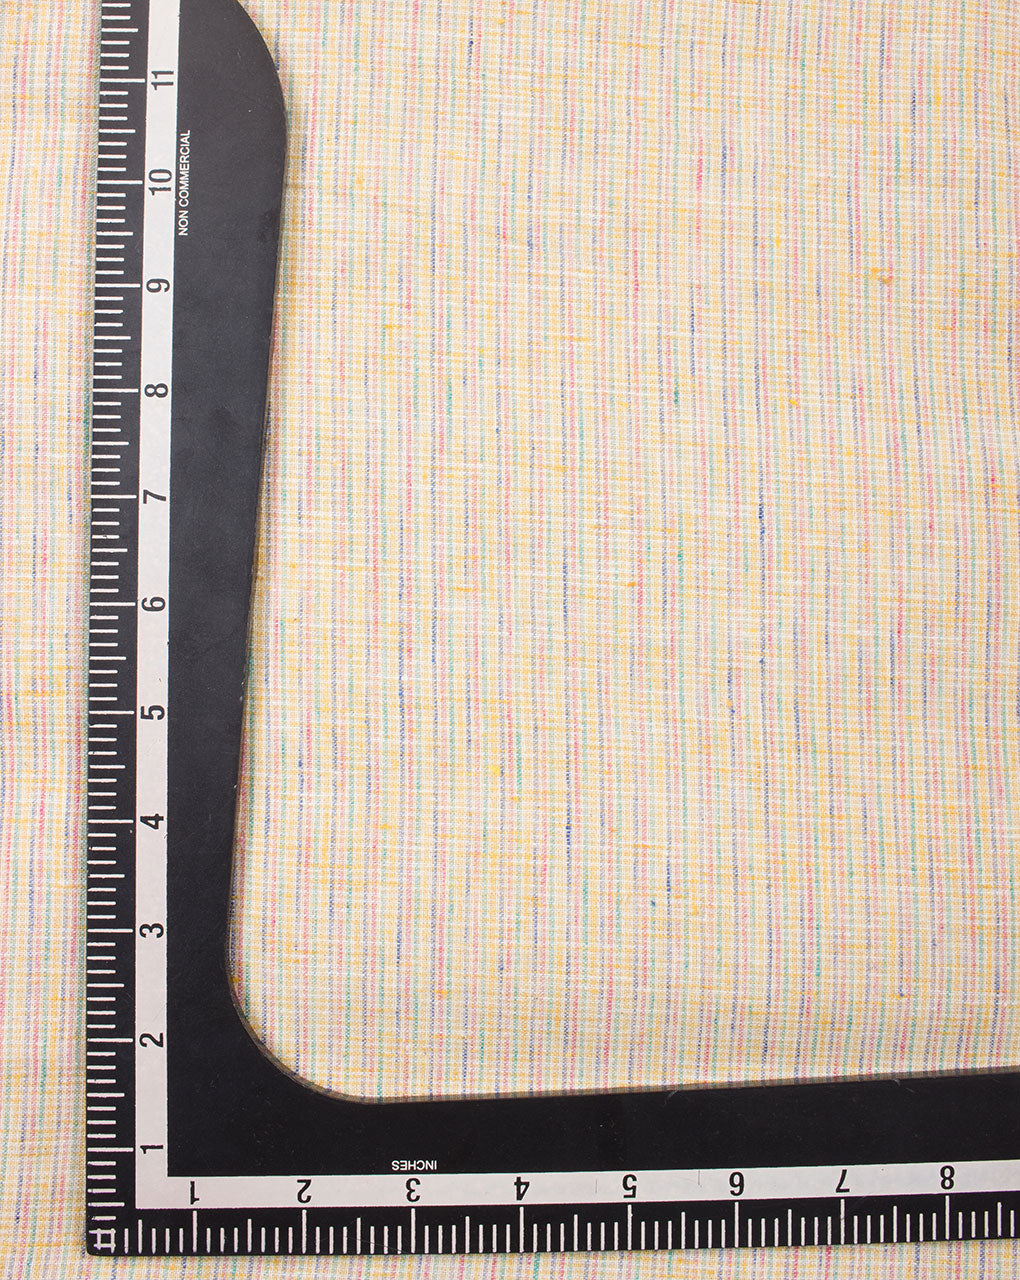 Beige Stripes Pattern Woven Loom Textured Cotton Fabric - Fabriclore.com